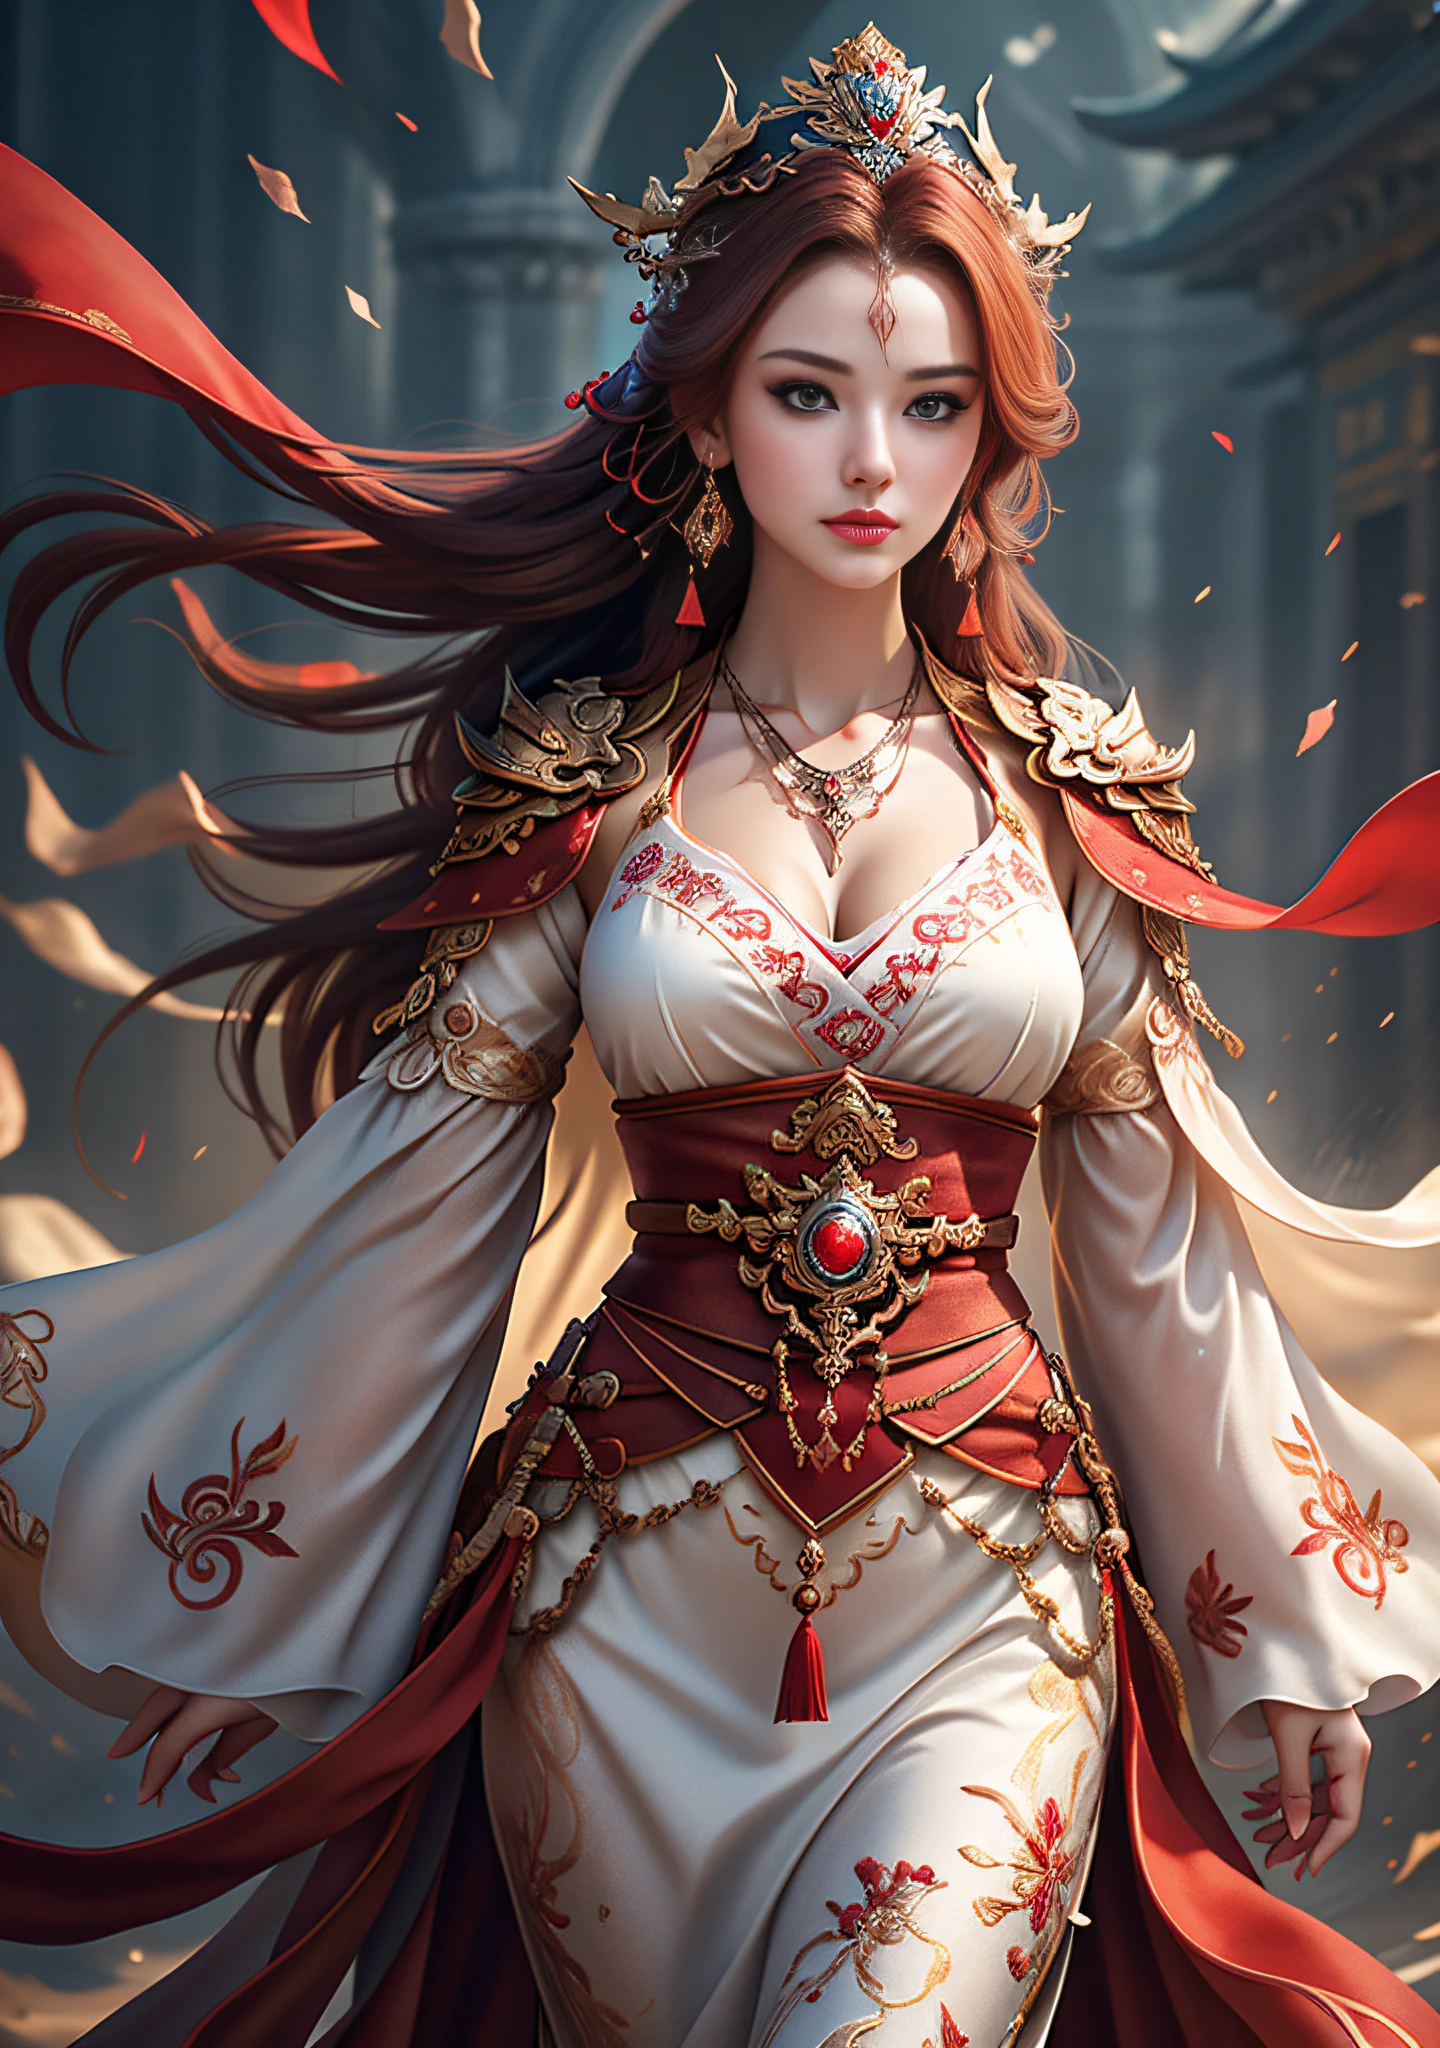 Best quality, masterpiece, ultra-detailed high resolution, (charming: 2.0), (very seductive hot eyes: 2.0), (realistic: 1.4), original photos, illustrations, wanjian, multiple weapons (luminous weapons) 1 girl dancing, (Solo: 1.2), (Cowboy Lens: 1.2), (Hair Crown: 1.2), Chinese Dunhuang Traditional Costumes, (Red Eyeliner: 1.2), (Evil: 1.4), (V-Neck: 1.5), (Large Necklace: 1.4), Lace Armor, (Evil Eye: 2.0), (Audience: 1.5), Earrings, Dynamic Angle, Opera House, messy_long_hair, Ink, Cinema Lighting, lens_flare, Velvet, Tassels, Ribbons, Color Embroidery, white gold red,